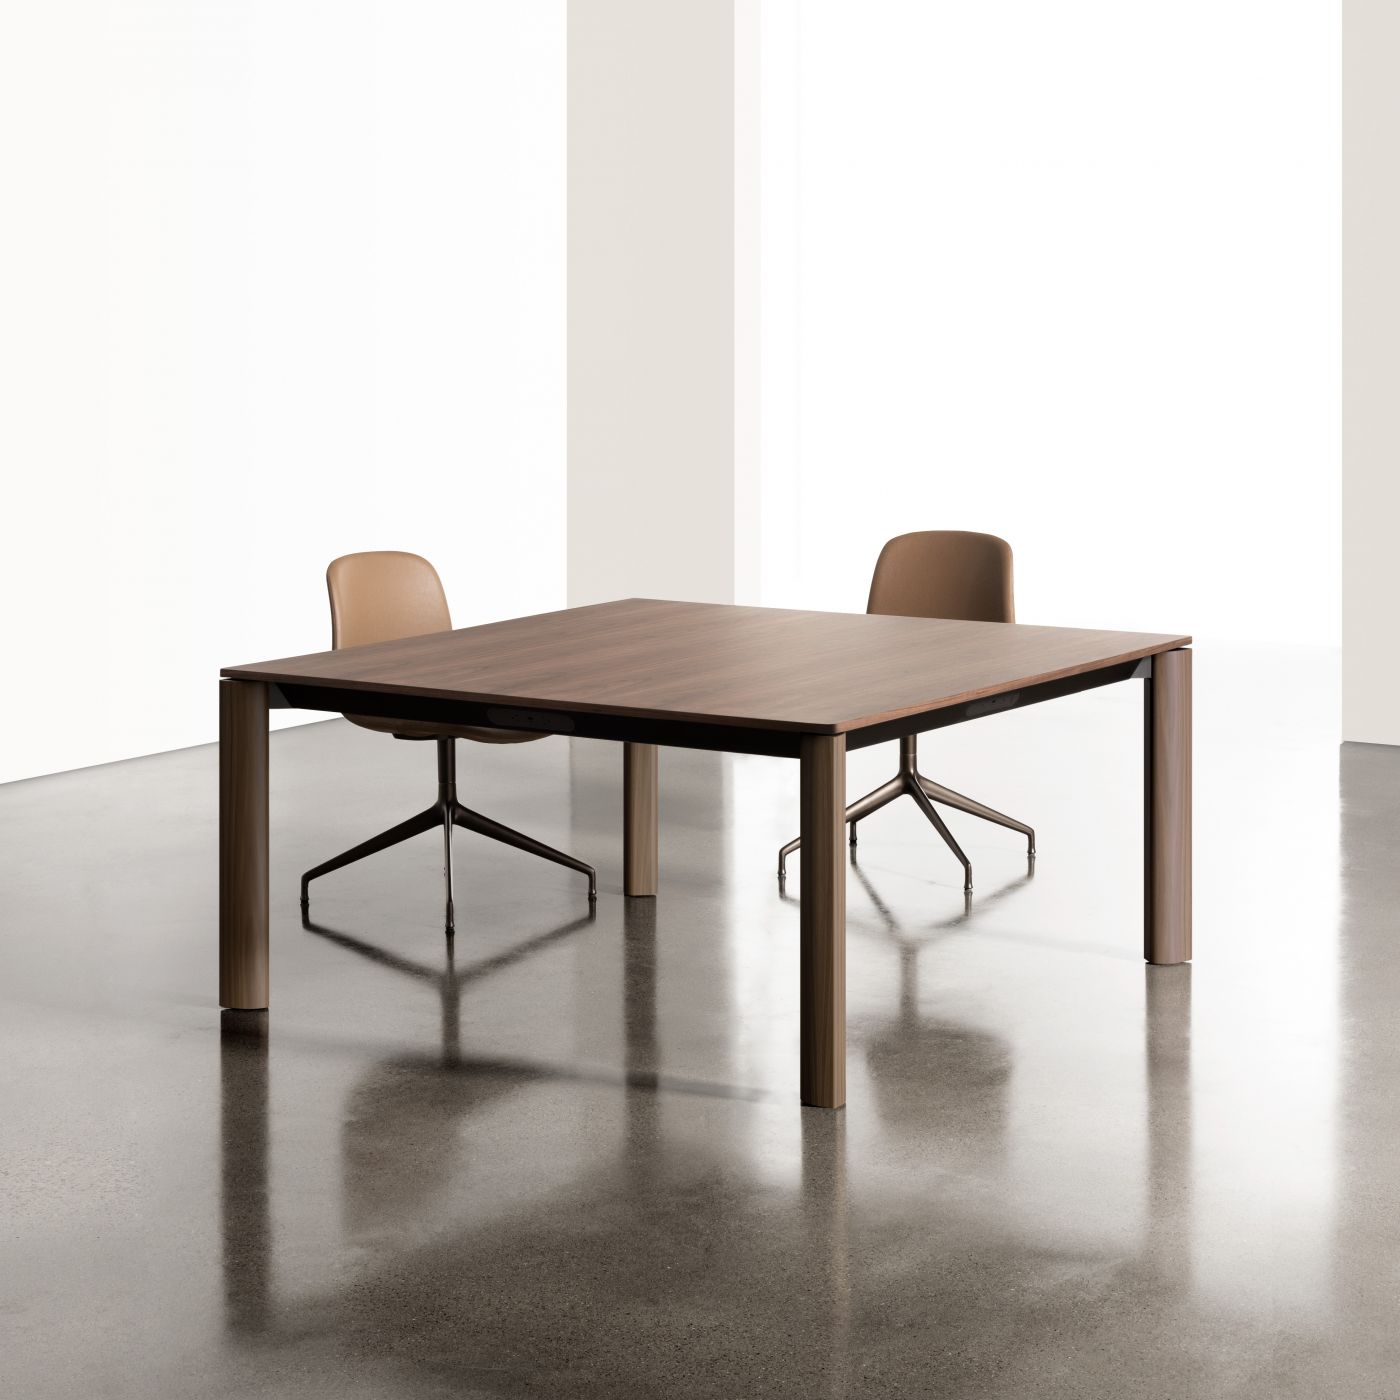 Meeting tables are available in a full range of sizes, materials, and finishes.